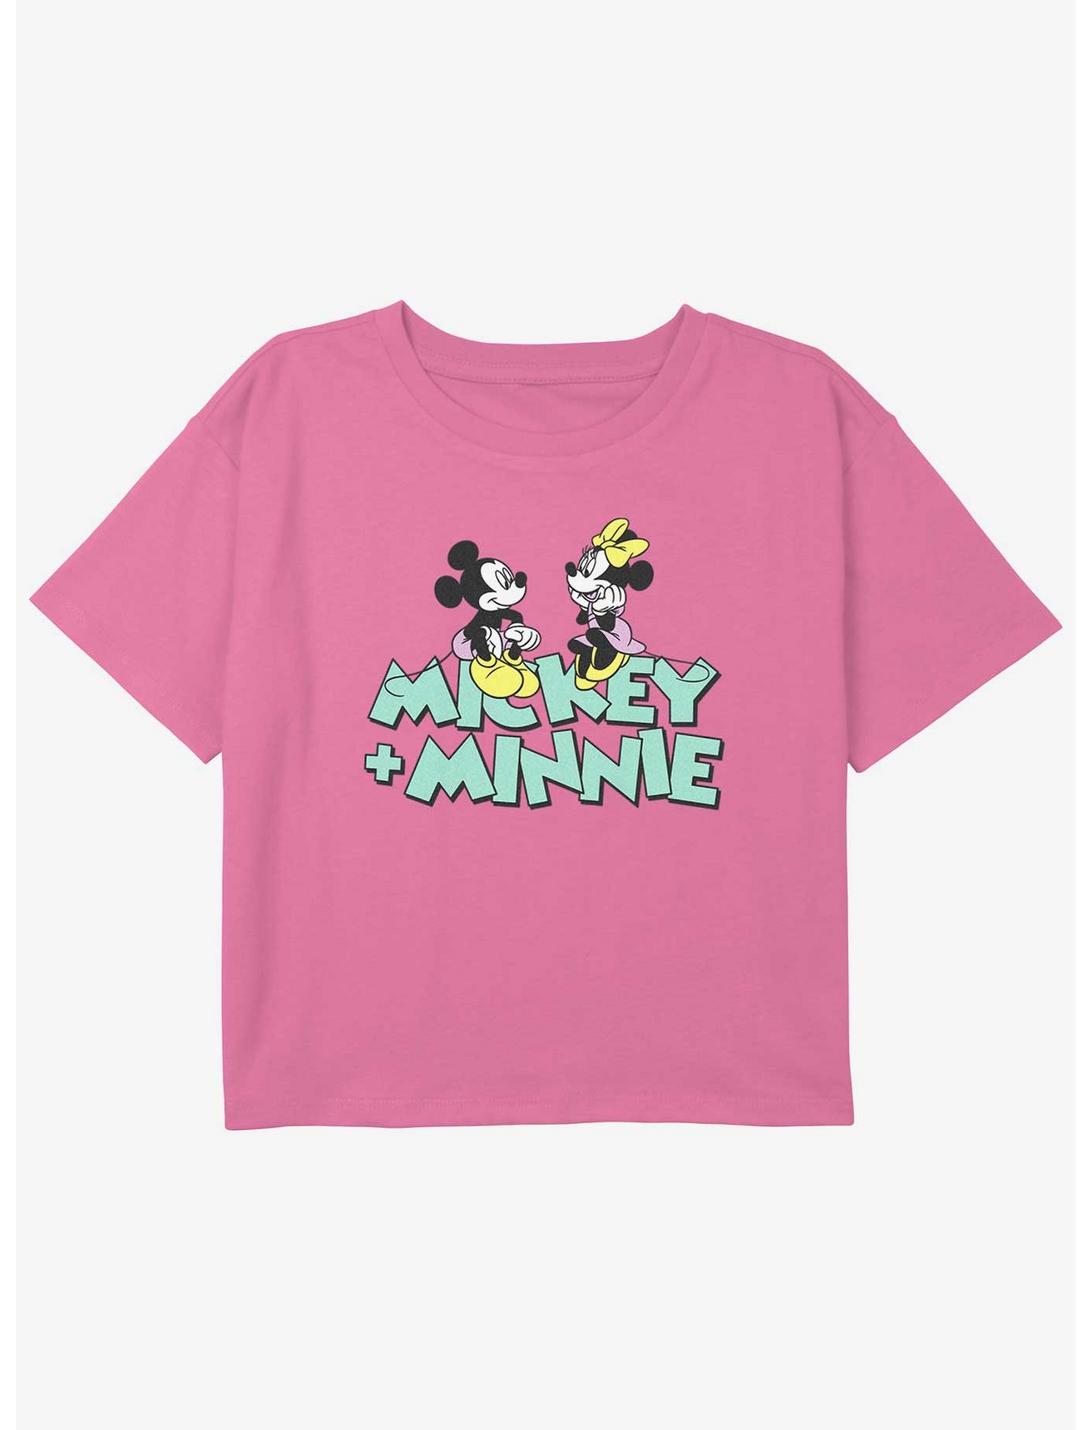 Disney Mickey Mouse Mickey Loves Minnie Girls Youth Crop T-Shirt, PINK, hi-res